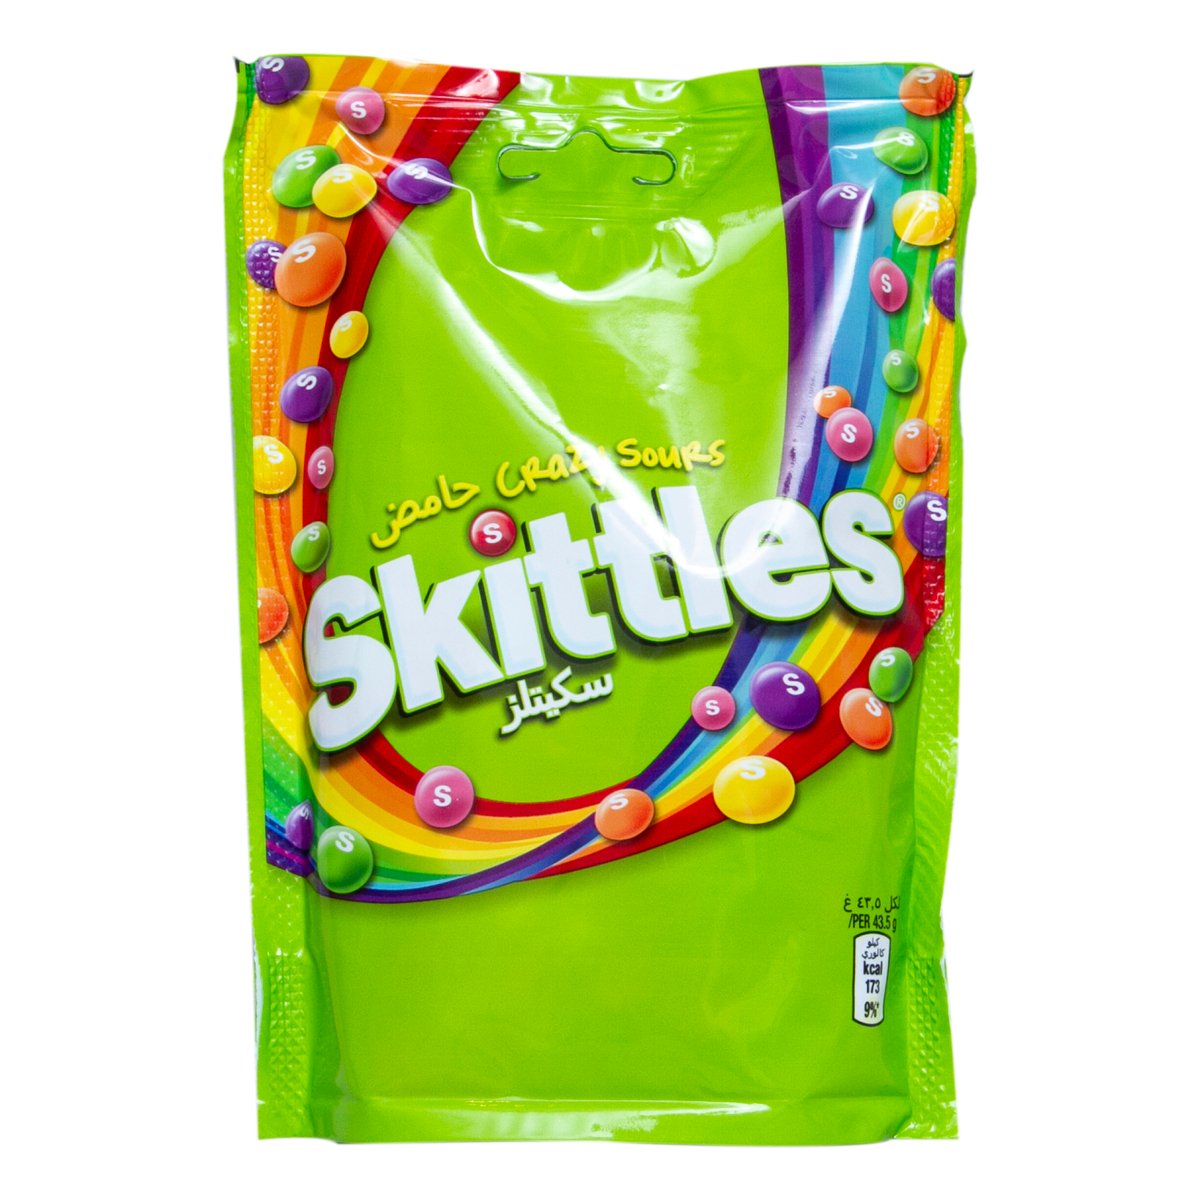 Skittles Crazy Sours Chocolate 174g